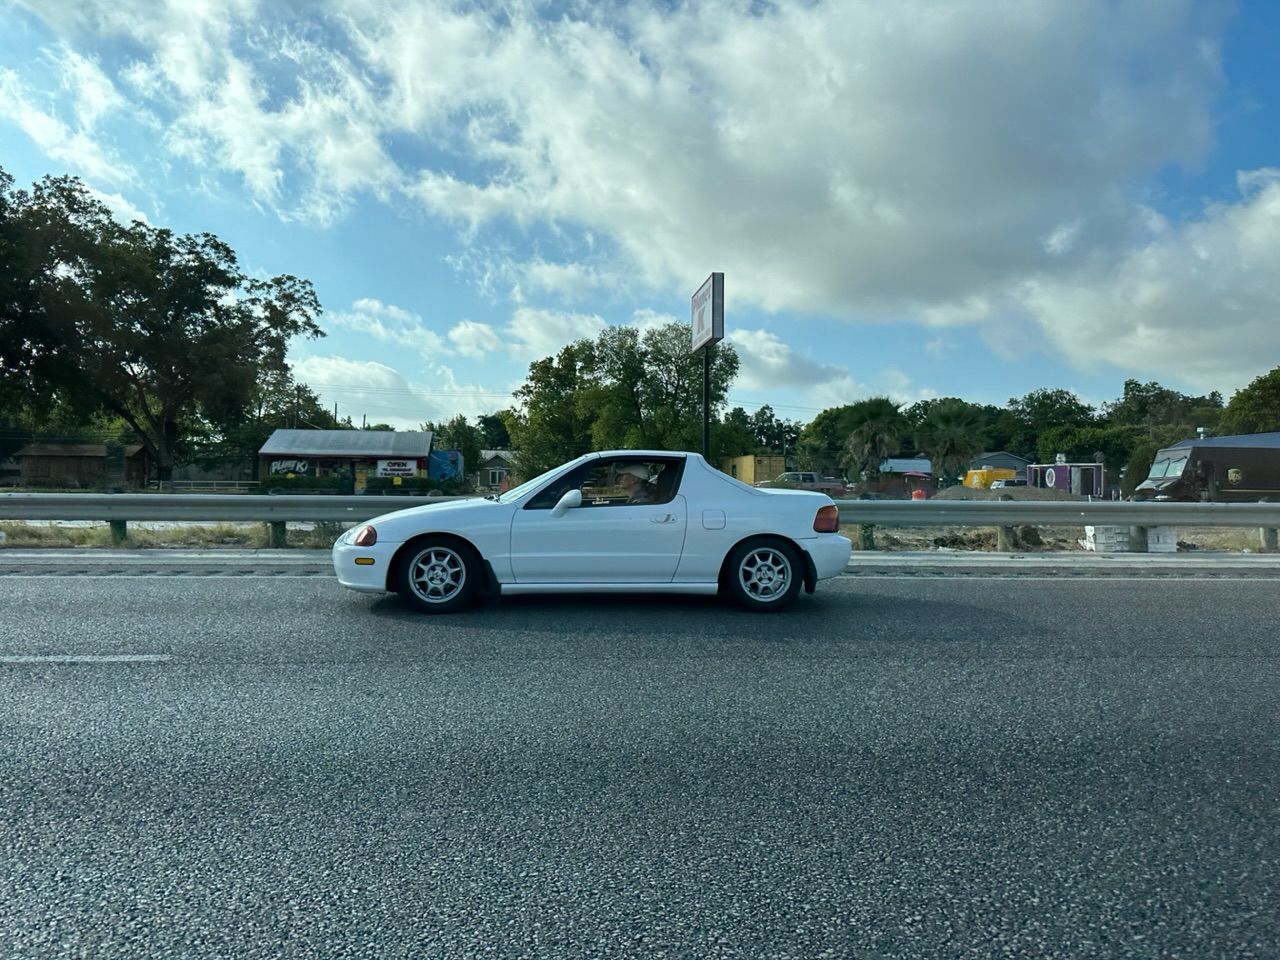 A white Del Sol, rolling along. The driver looks focused, despite a drink in his hand.